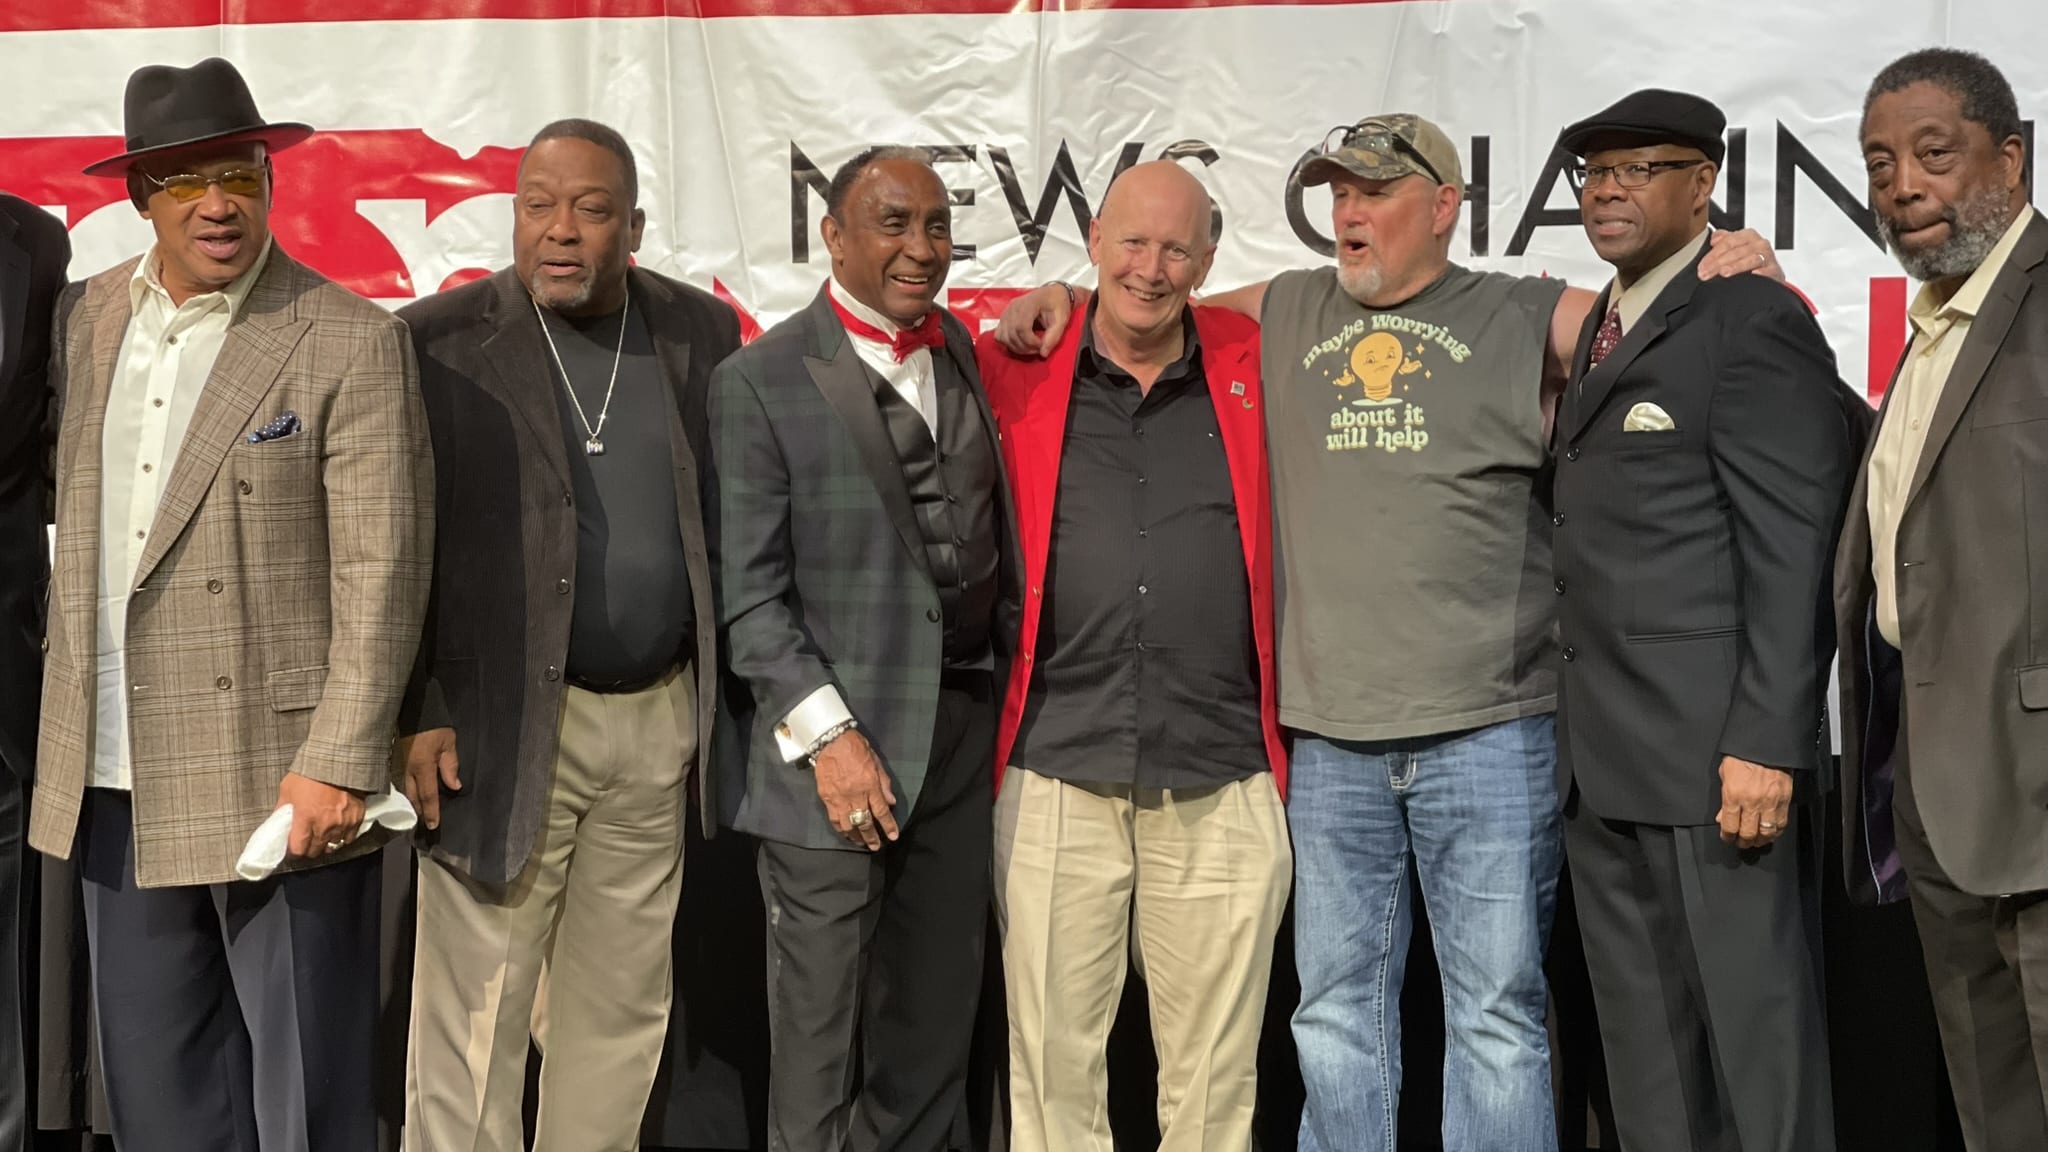 L-R Mike Rozier, Gregg Pruitt, Johnny Rodgers, David Max, Larry the Cable Guy, Rick Upchurch, Rich Glover